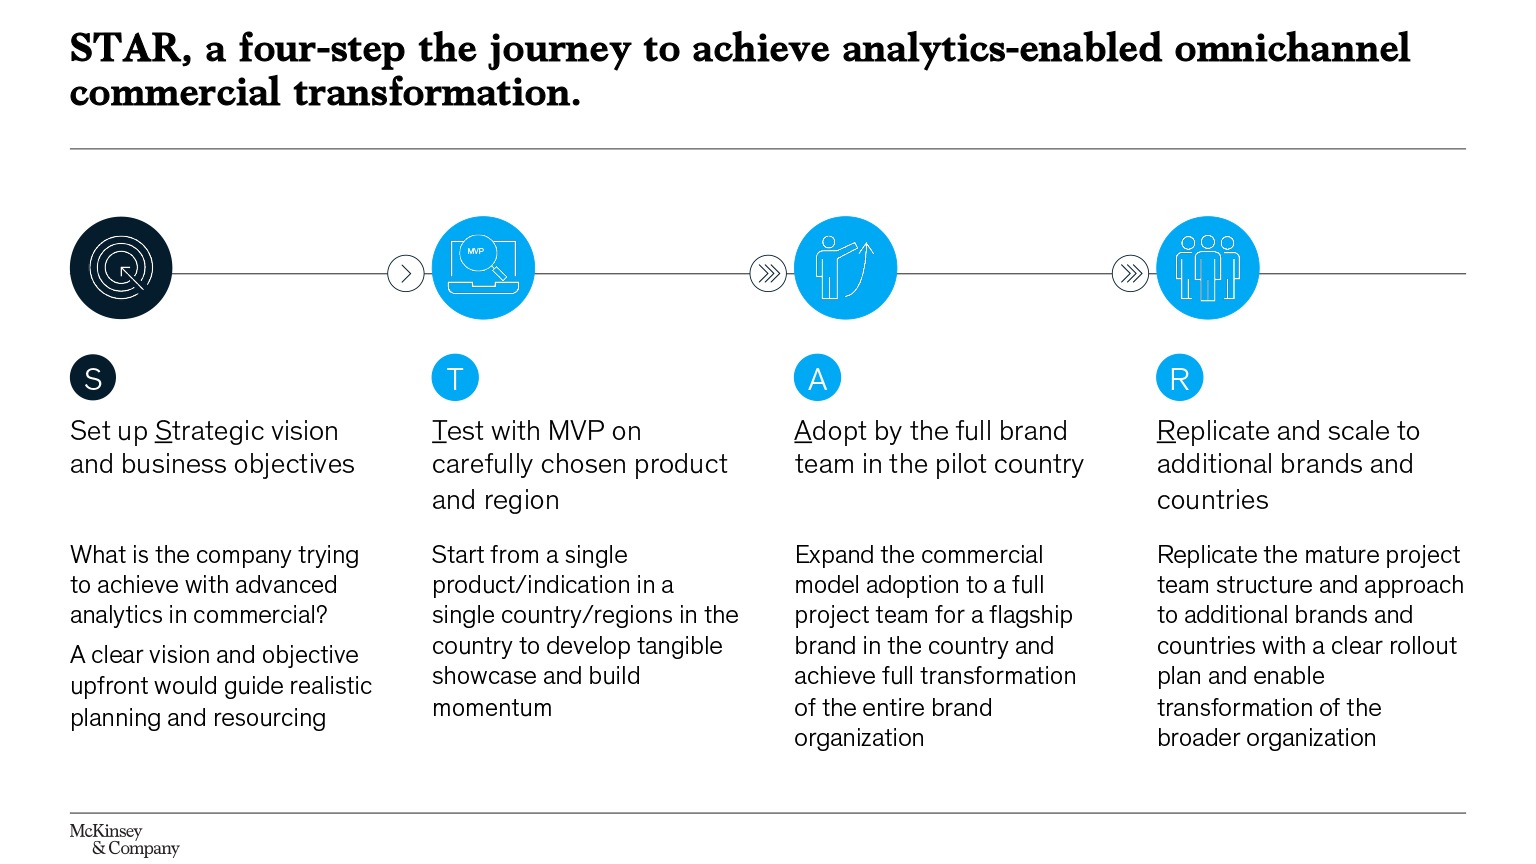 STAR, a four-step journey to achieve analytics-enabled omnichannel commercial transformation